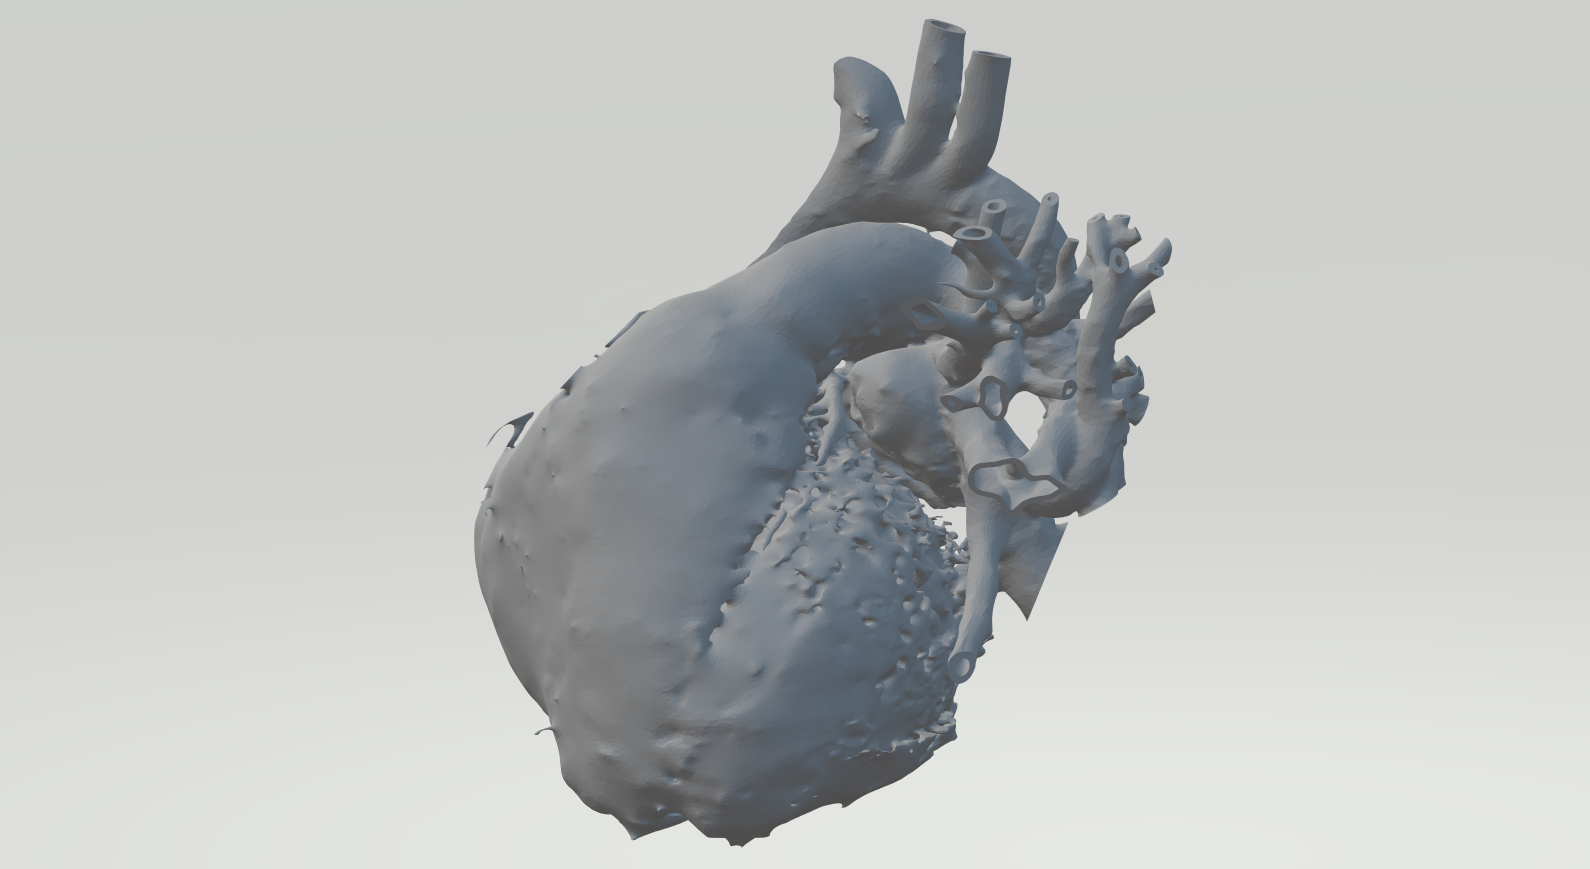 Will Support Structures Make or Break These 3D Printed Hearts?